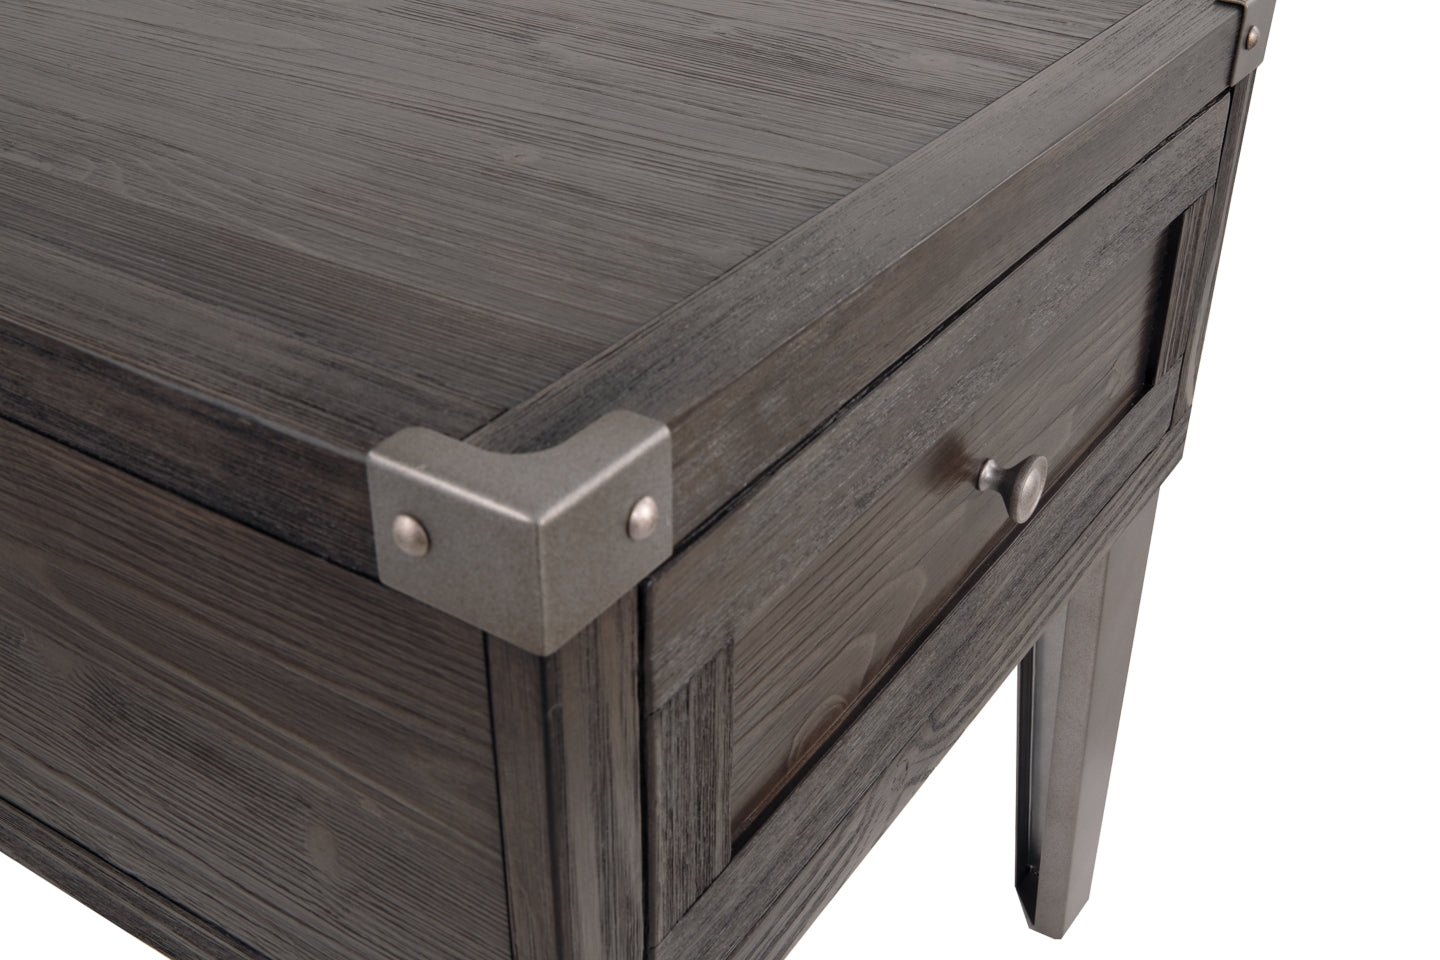 Todoe End Table with USB Ports & Outlets